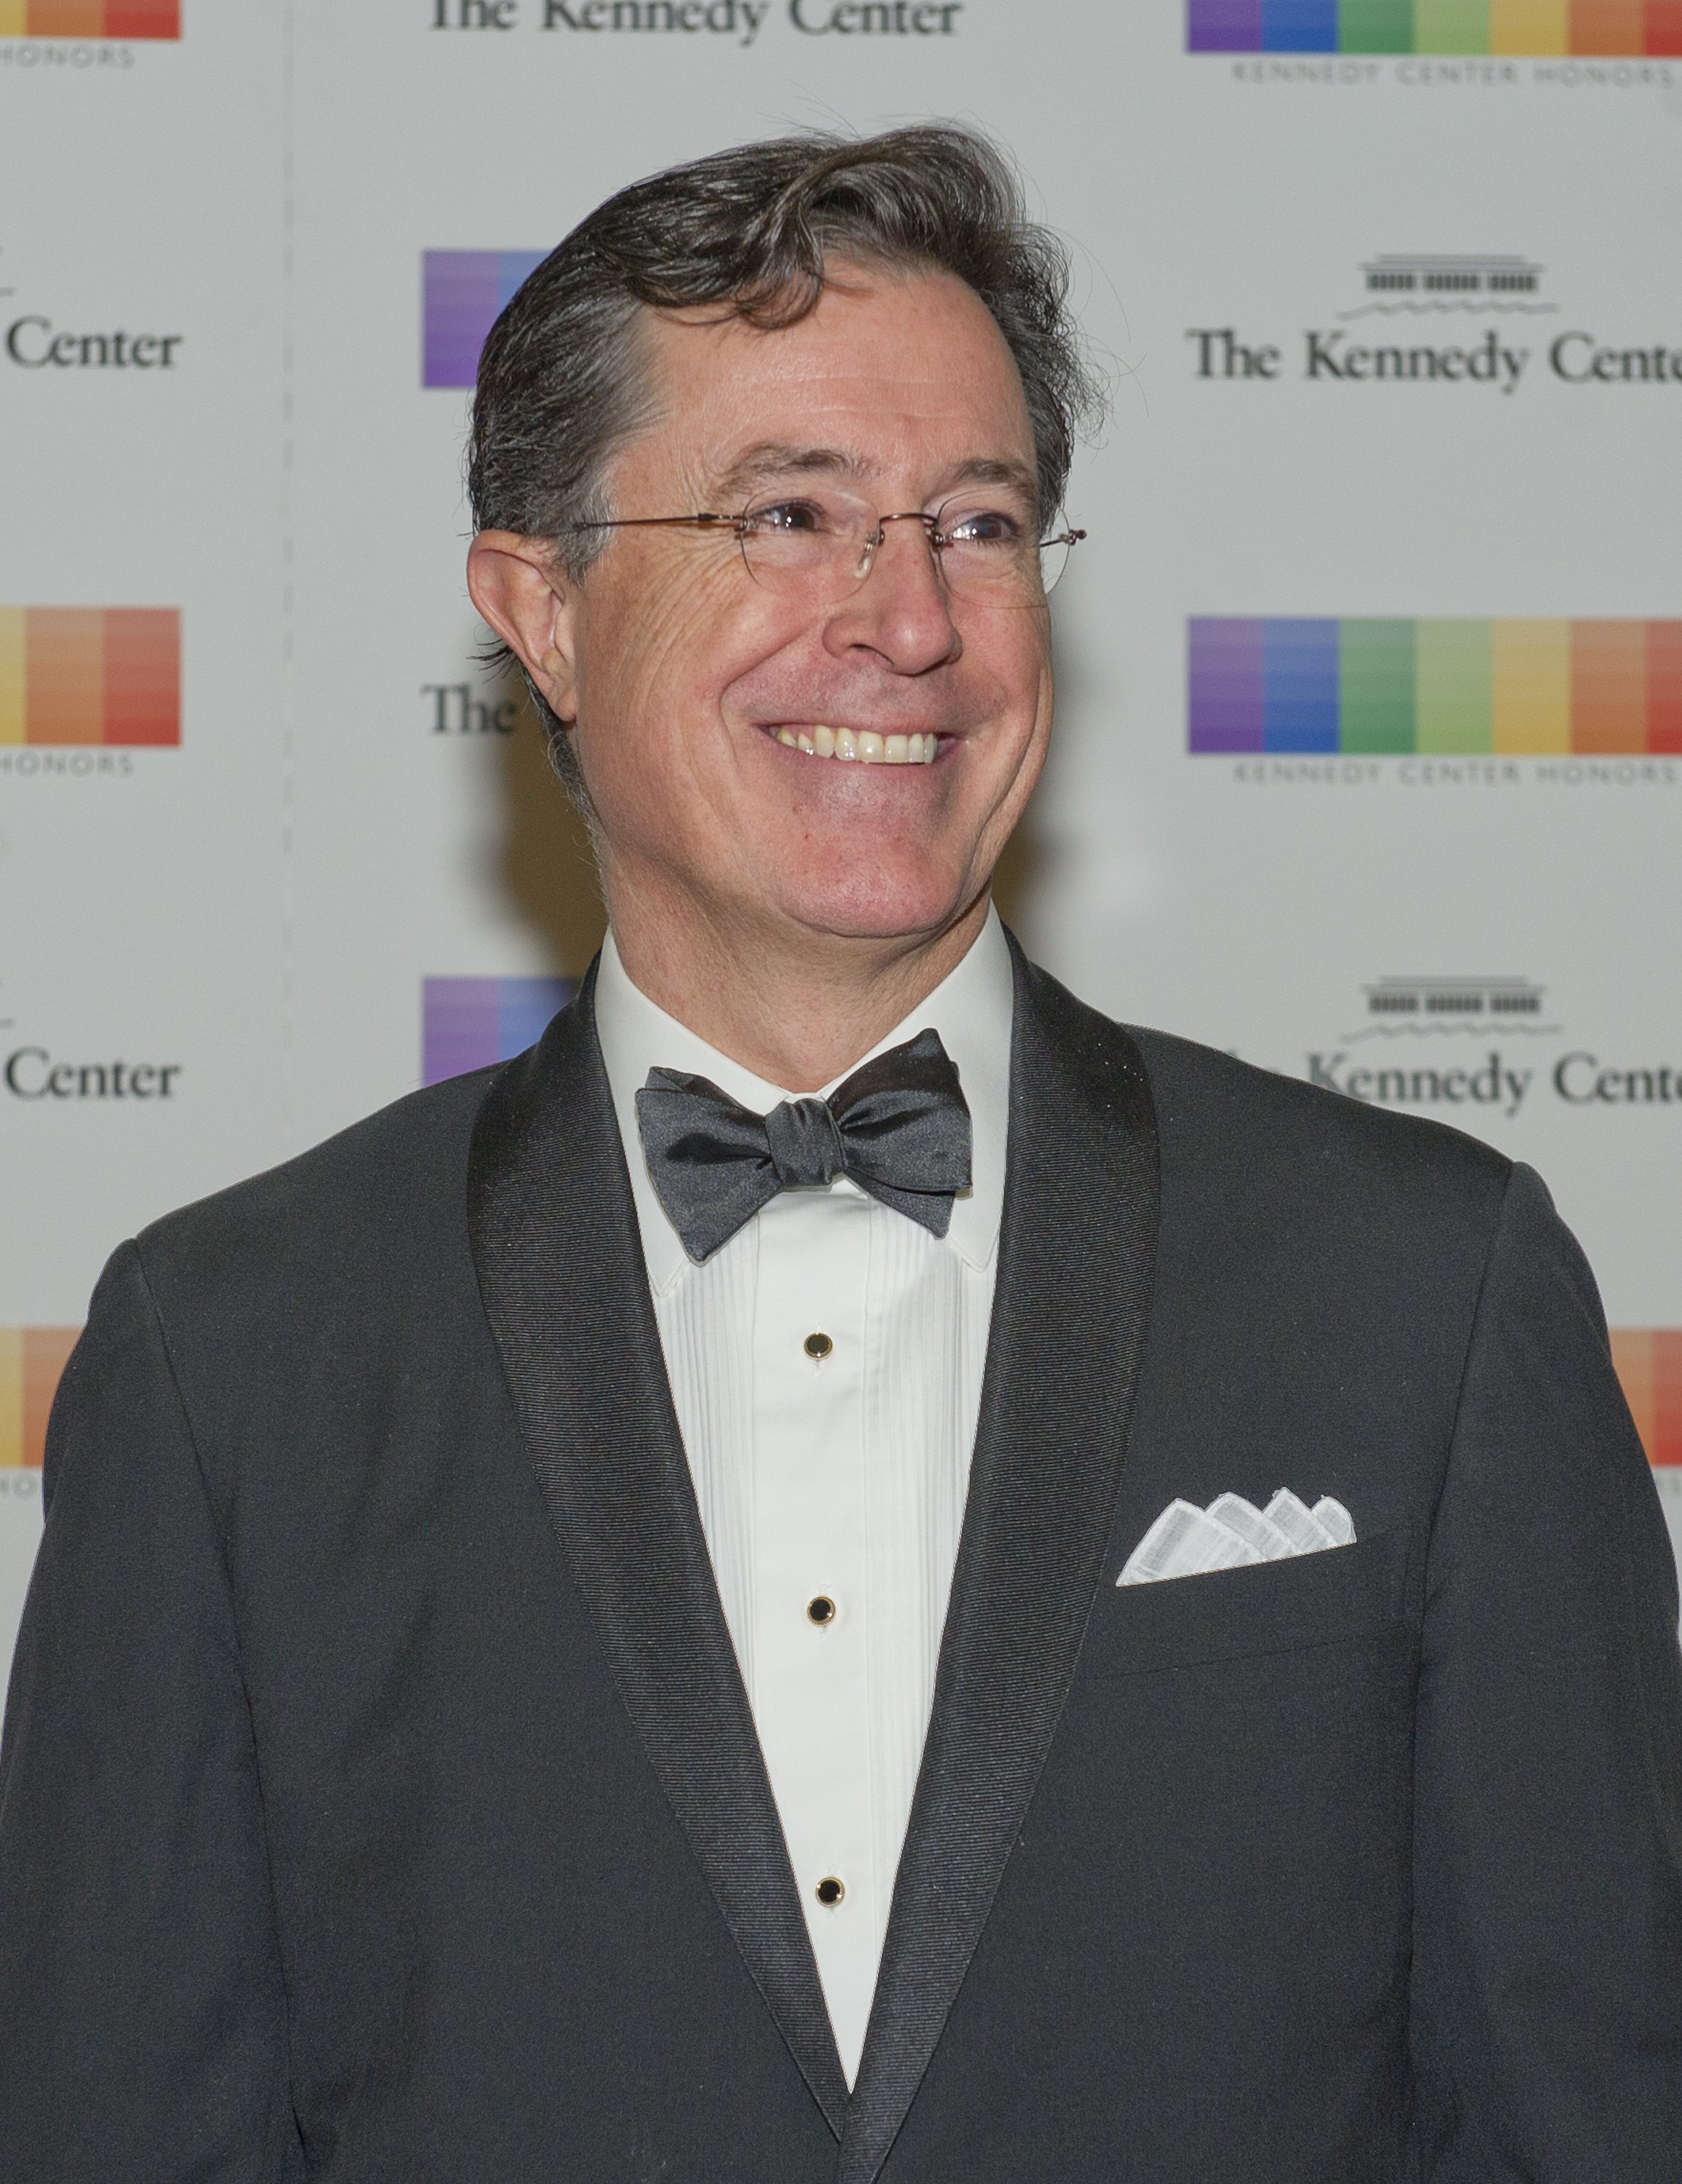 Stephen Colbert at the 38th Annual Kennedy Center Honors at the U.S. Department of State in Washington, D.C. on December 5, 2015 | Photo: GettyImages